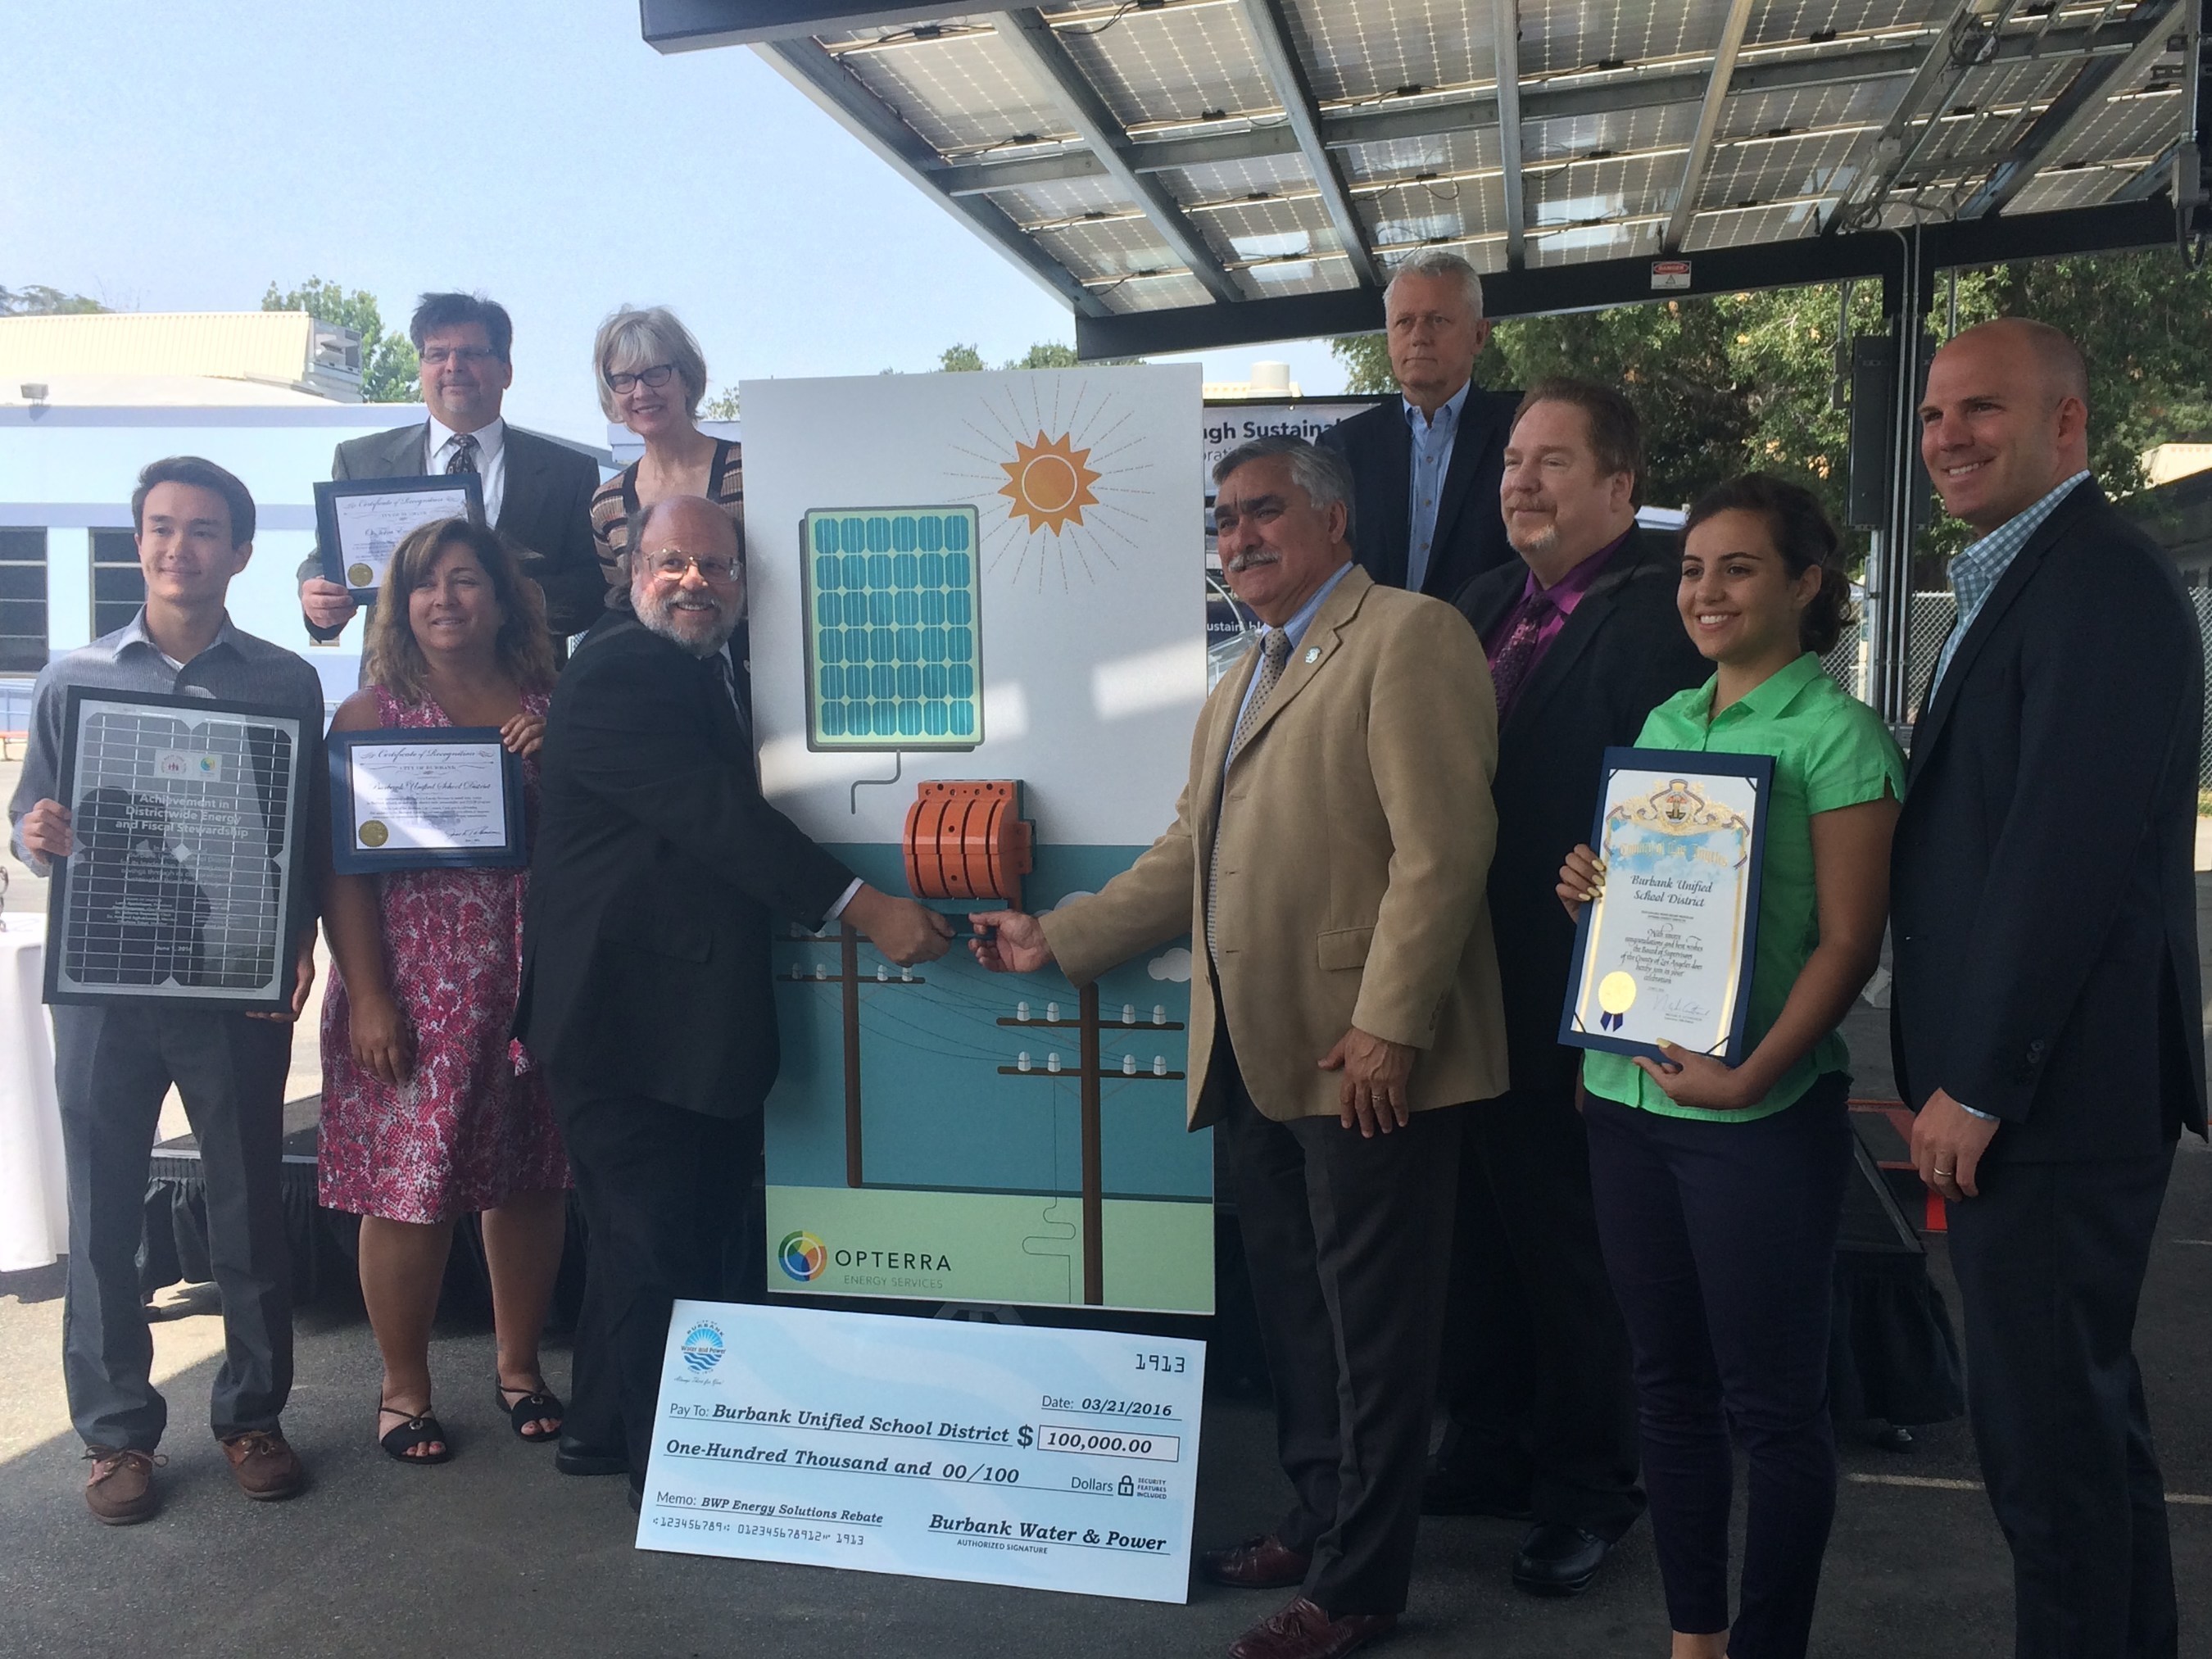 Members of the Burbank community, including the Board of Education President Larry Applebaum, Mayor Jess Talamantes, Superintendent Matt Hill, and OpTerra Energy Services partners and student interns "flip the switch" on renewable energy at the Burbank Adult School.